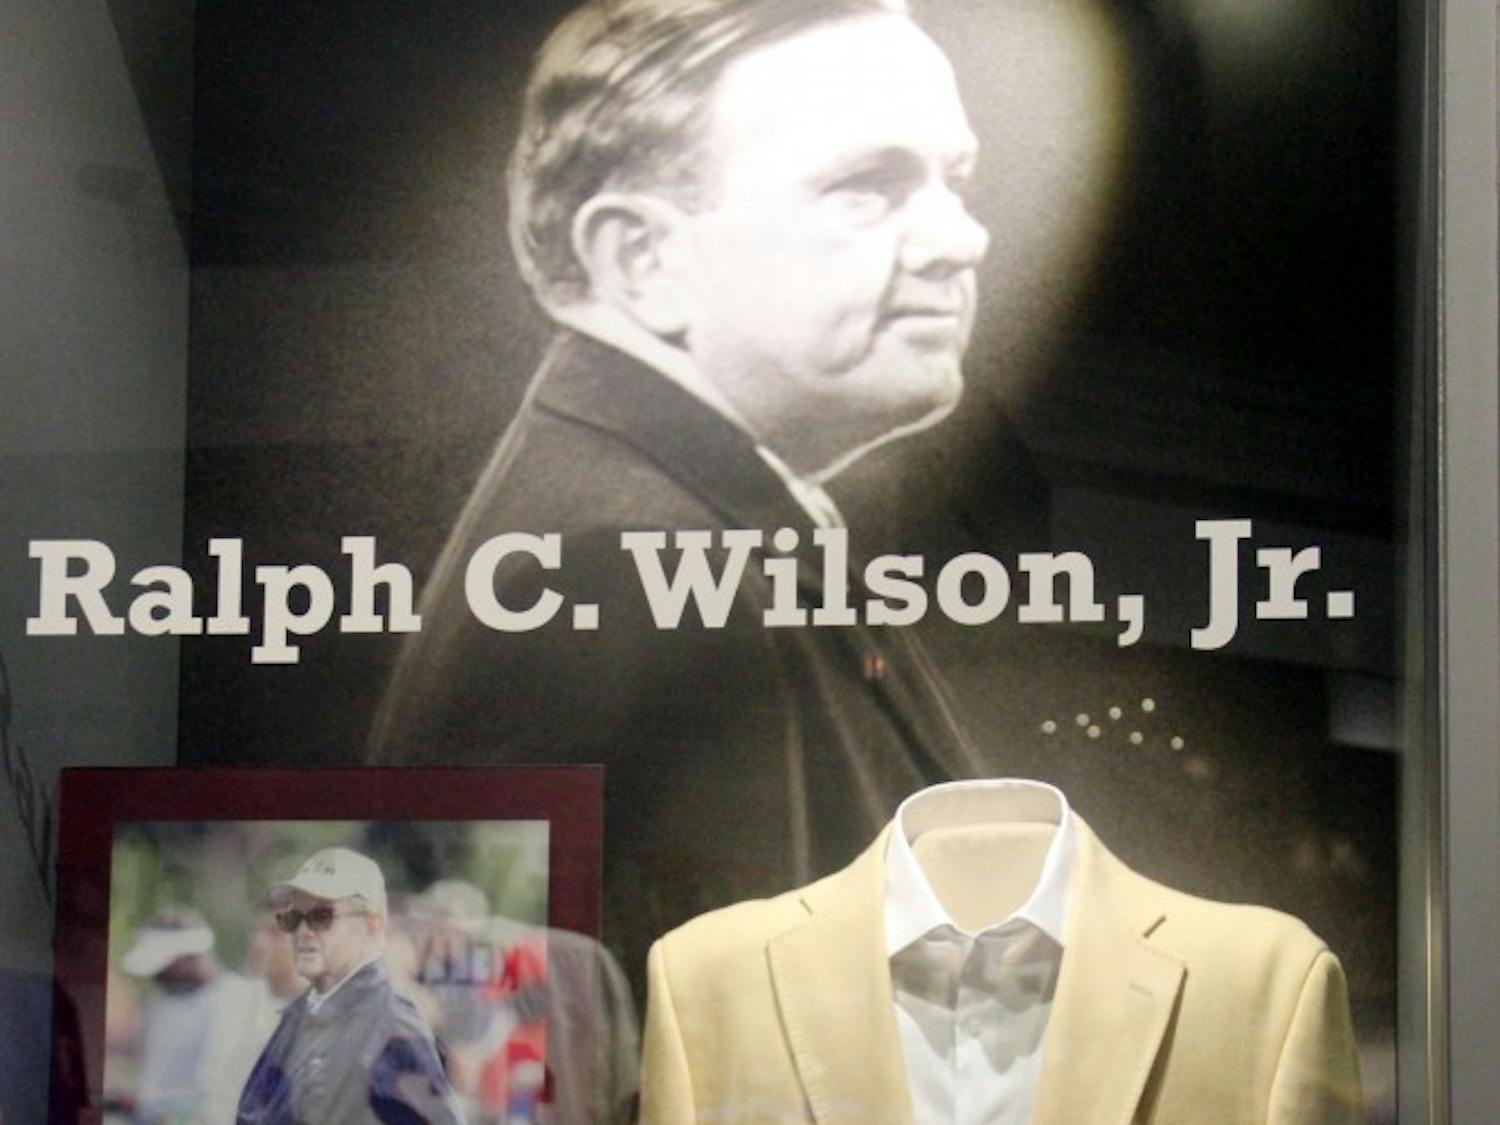 The opening display of the Ralph C. Wilson, Jr. gallery. The gallery contains significant artifacts of Buffalo sports history.